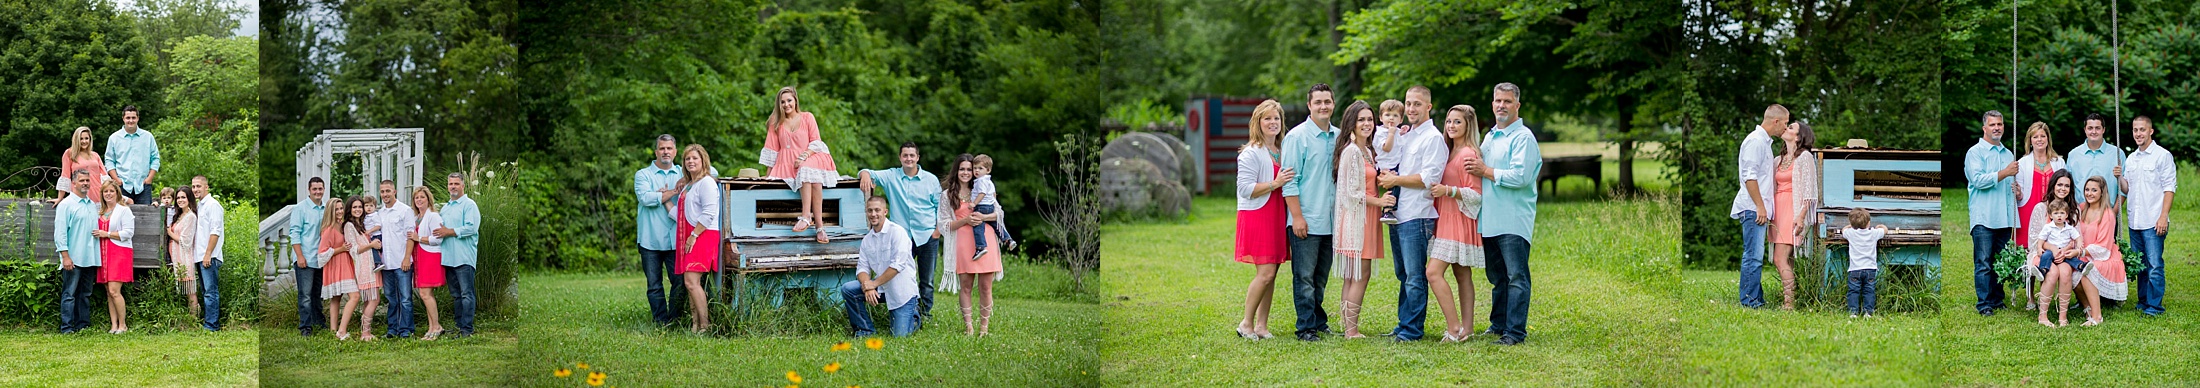 INDIANAPOLIS FAMILY PICTURES indiana carmel fishers greenwood plainfield avon portraits